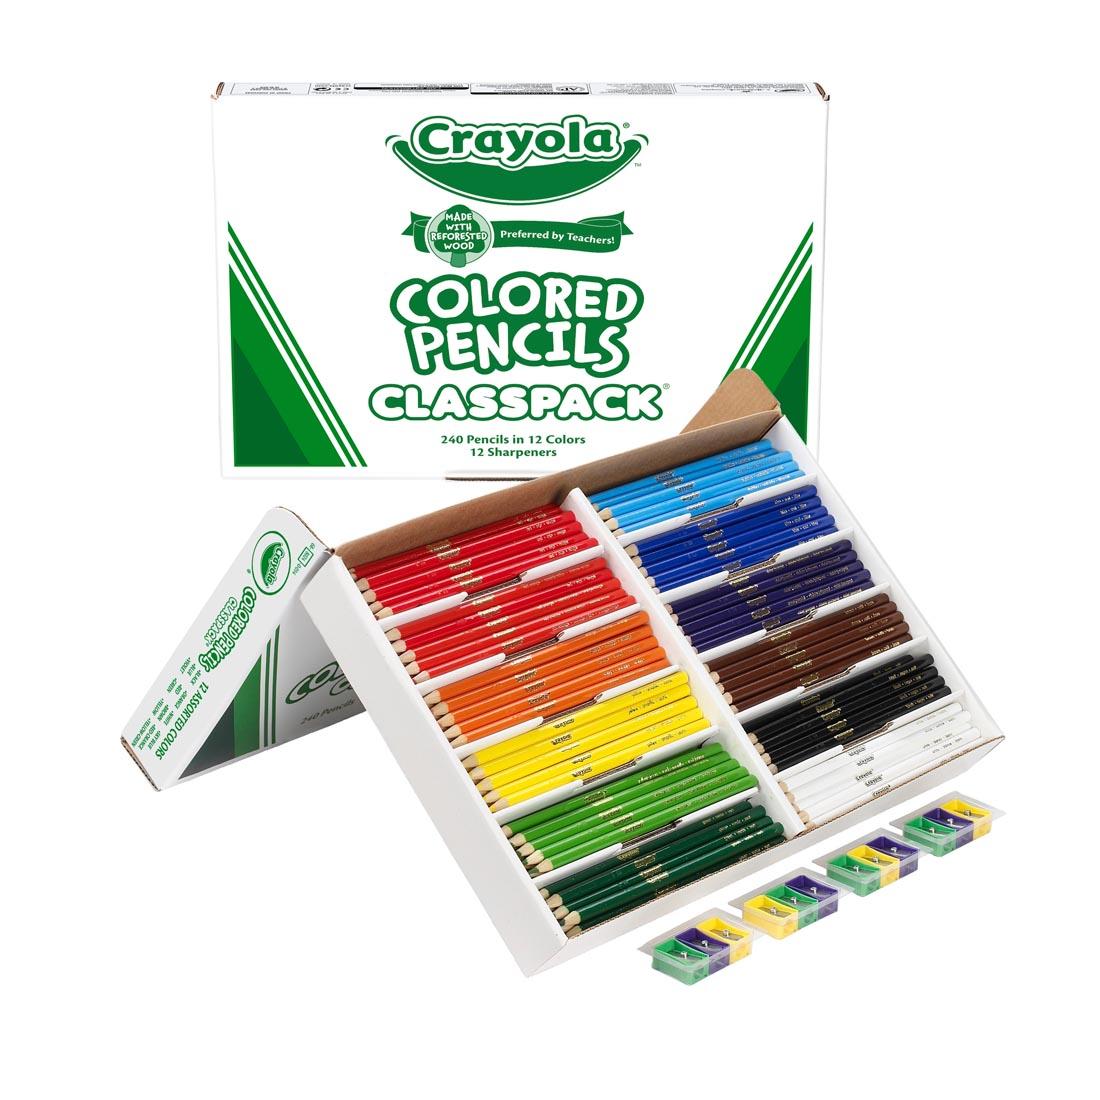 Crayola Colored Pencils 240-Count Classpack Box Shown Both Closed and Open with Sharpeners Beside It